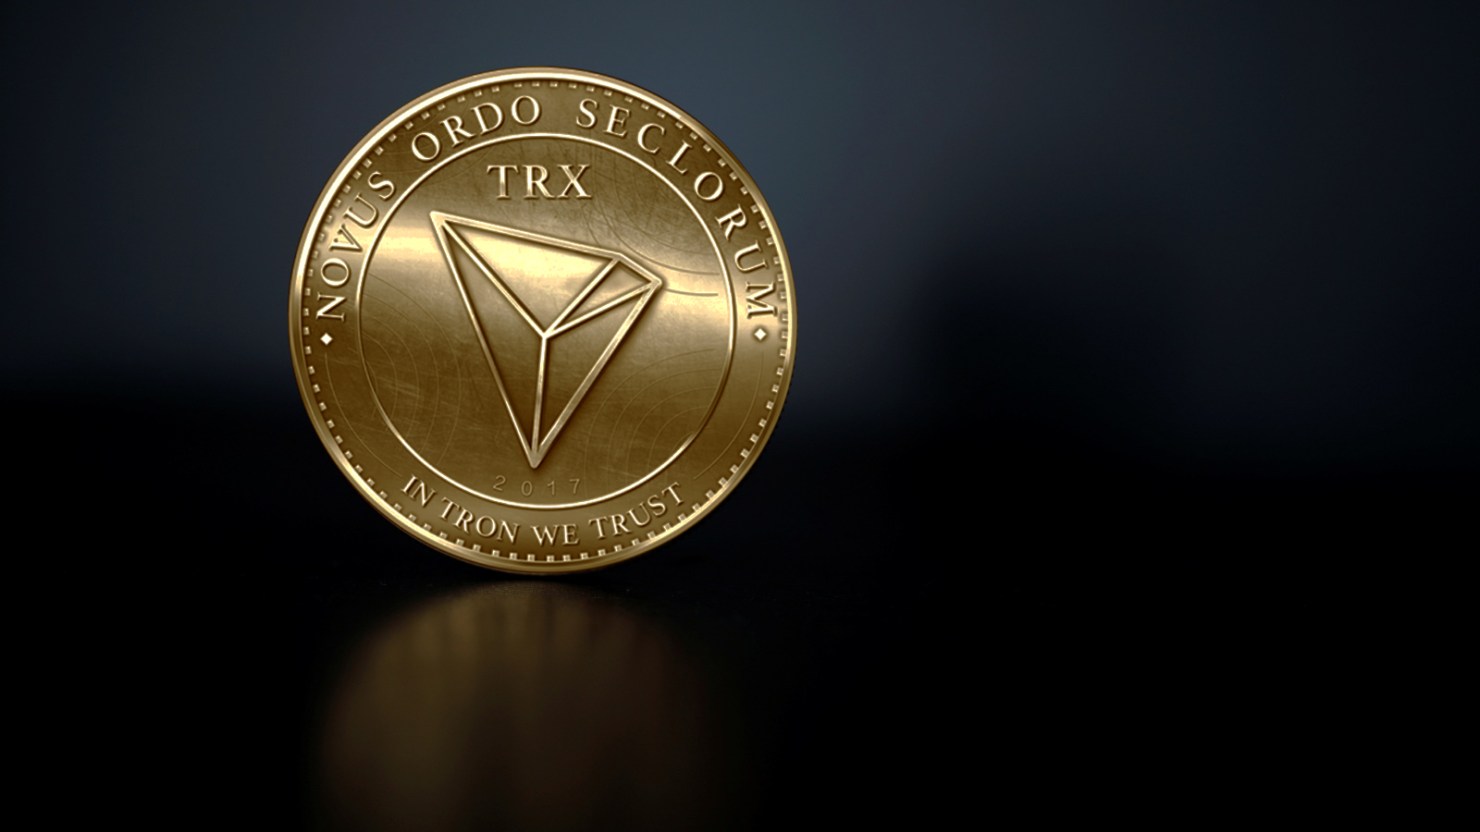  ethereum daily tron network trx could being 